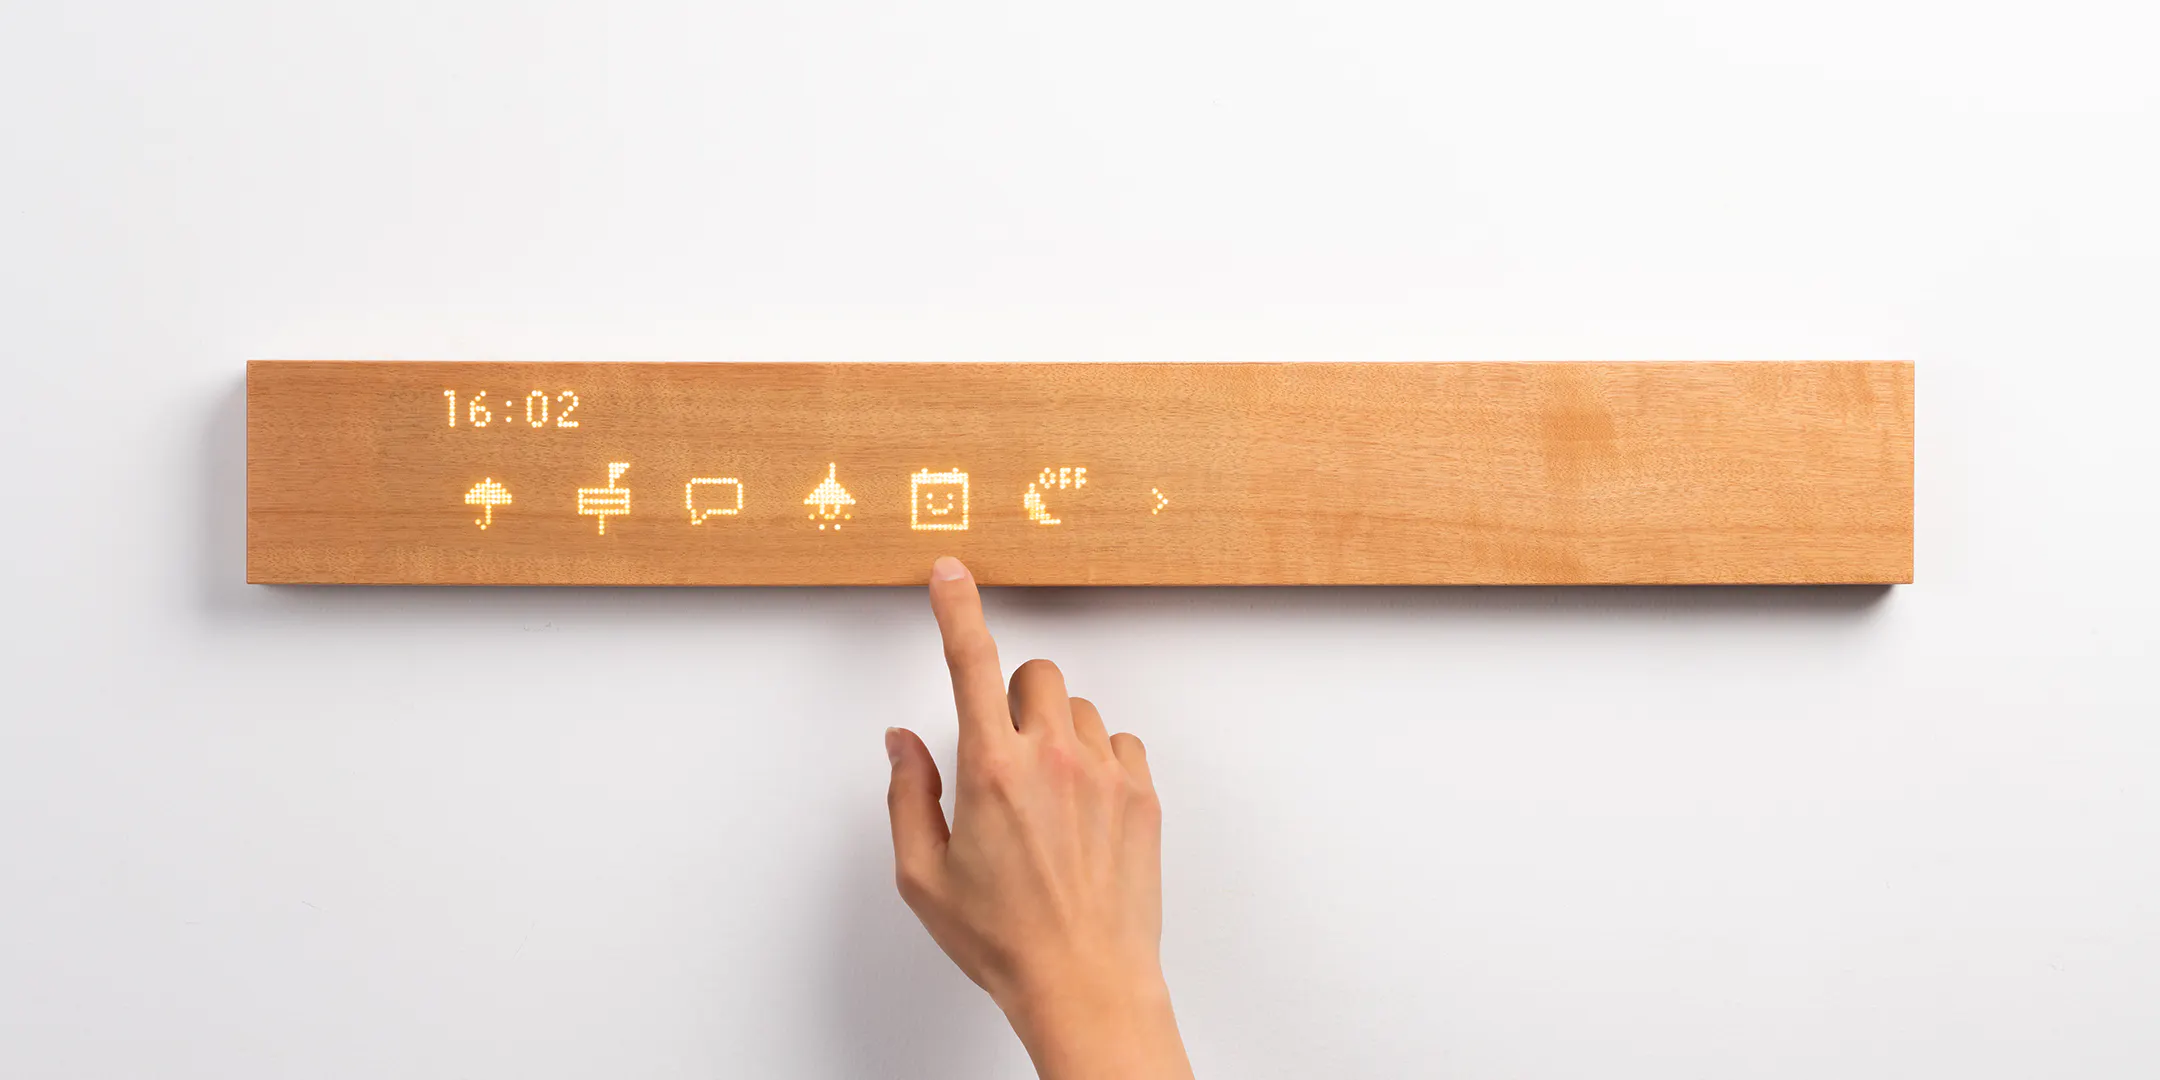 Mui Board from Mui Labs shows the weather on a wooden board